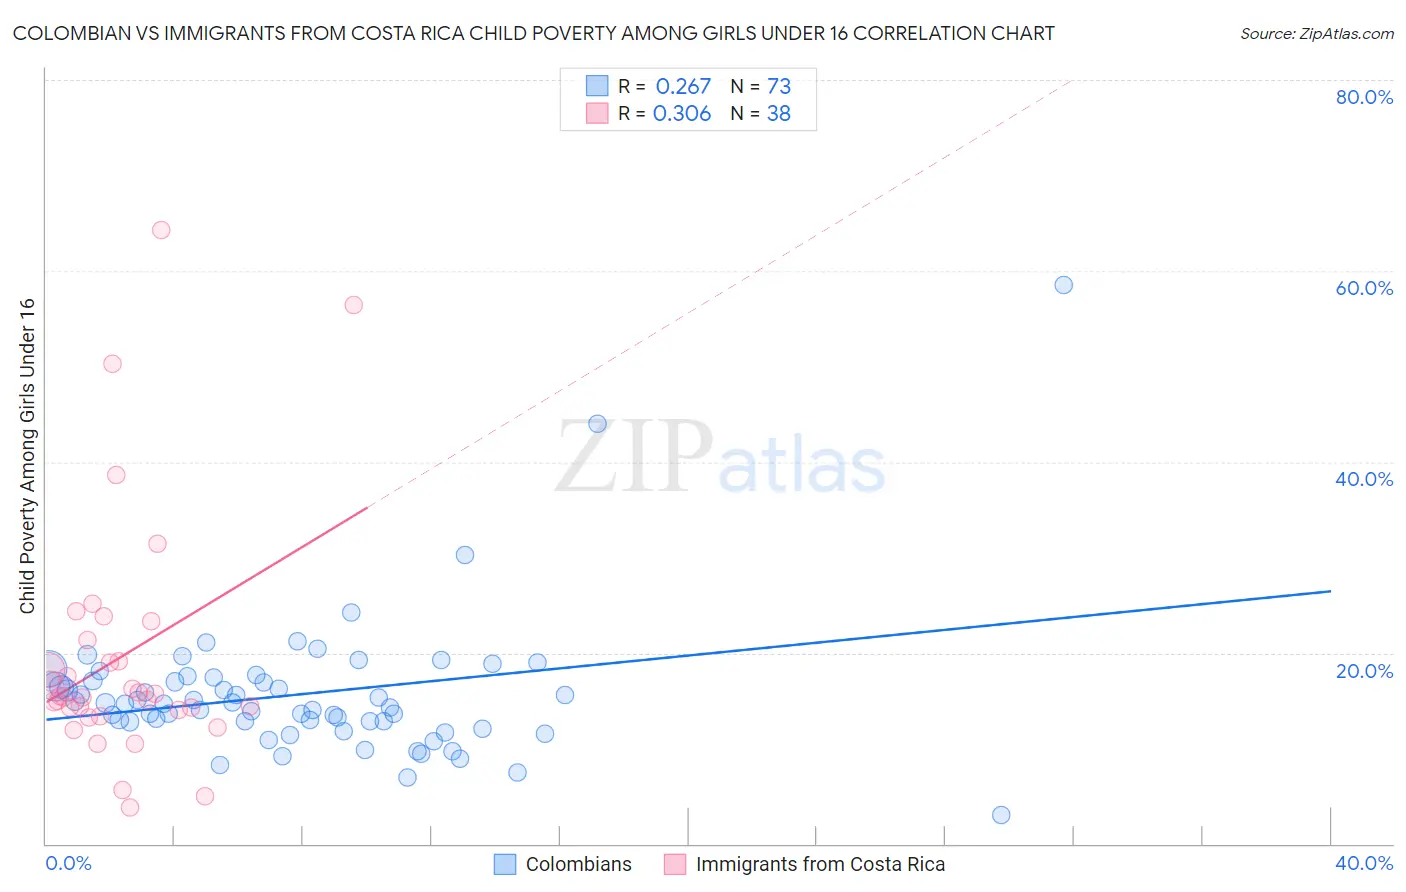 Colombian vs Immigrants from Costa Rica Child Poverty Among Girls Under 16